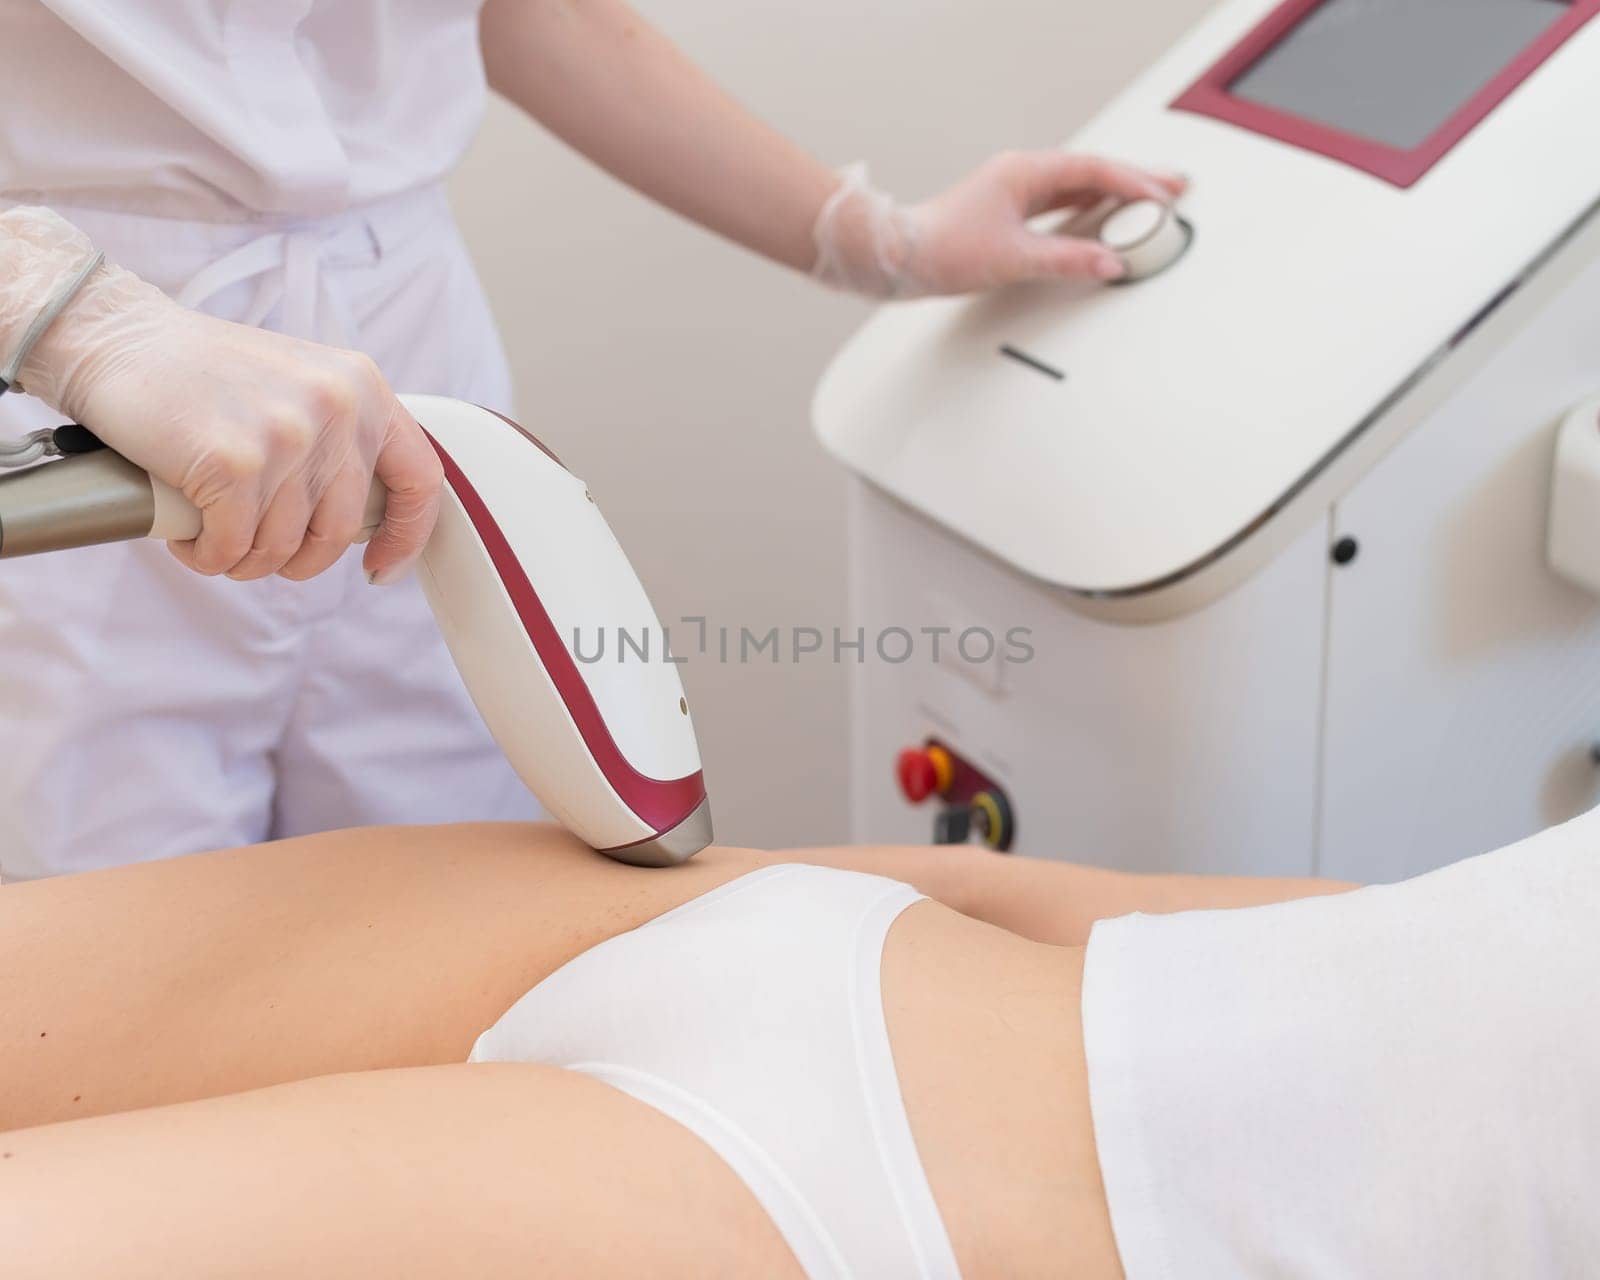 A woman in a professional beauty salon removes unwanted vegetation in the bikini area using laser hair removal.